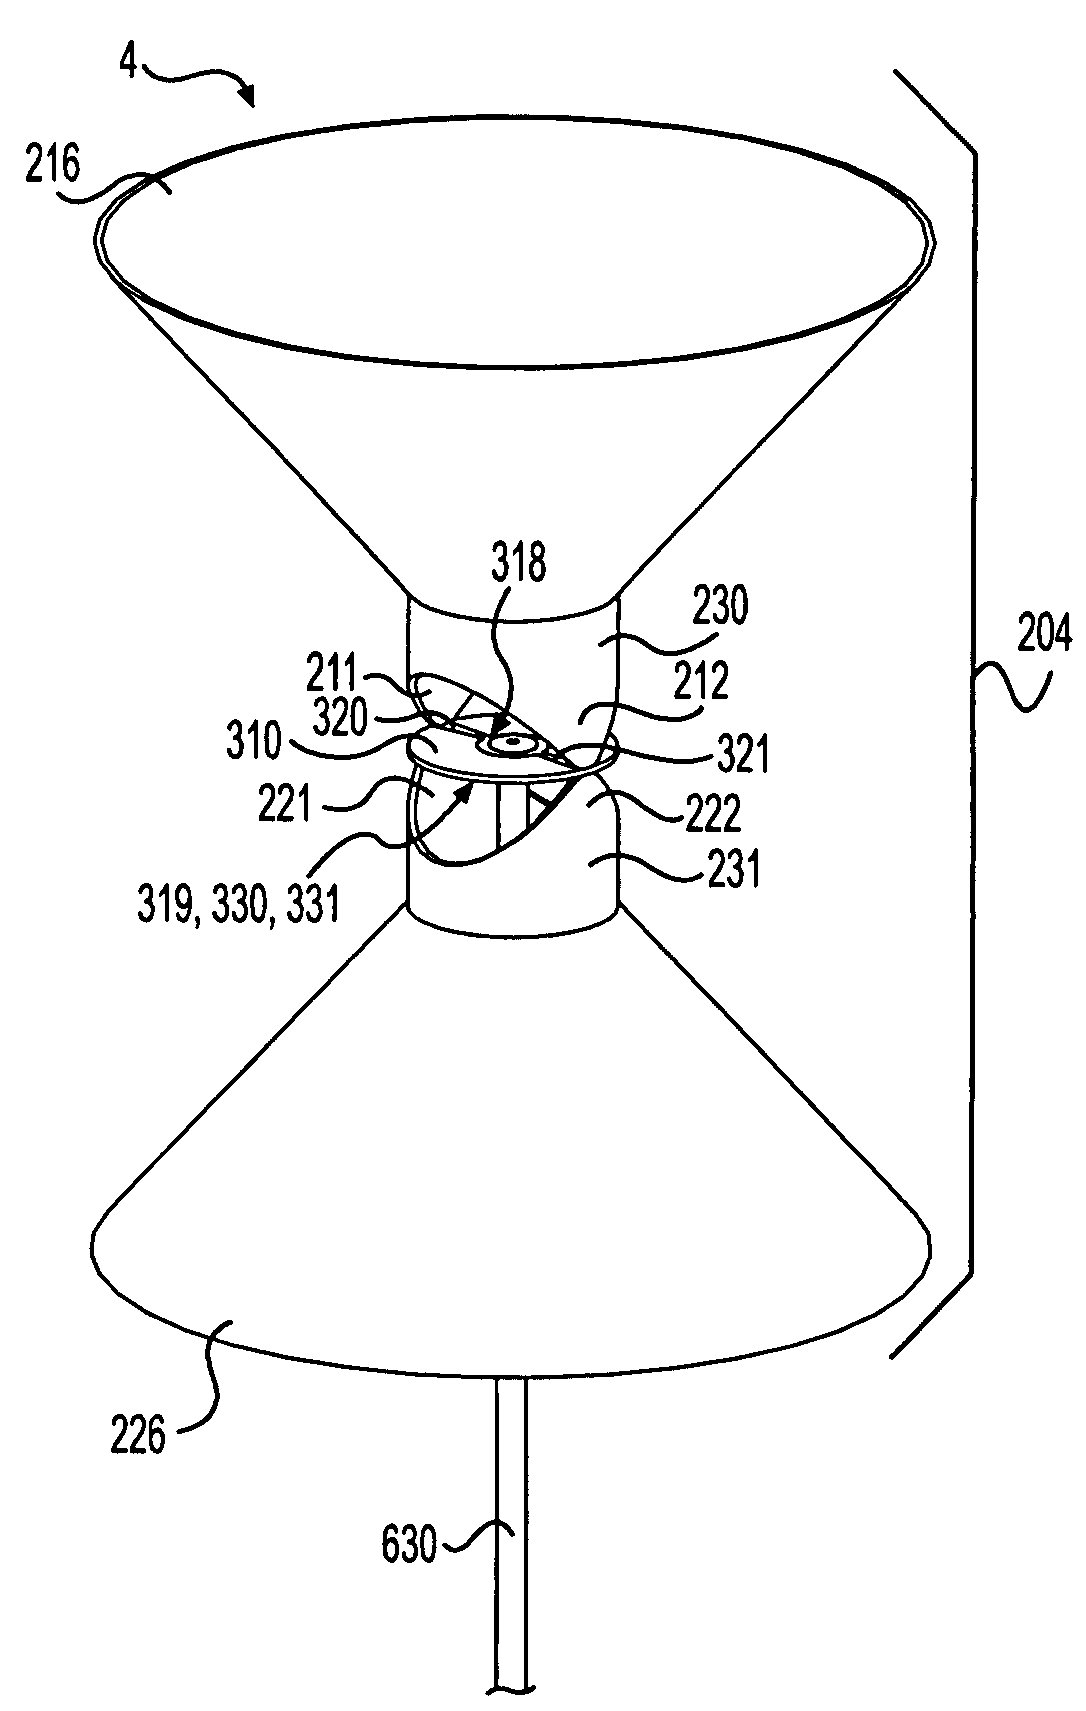 Broadband antenna system allowing multiple stacked collinear devices